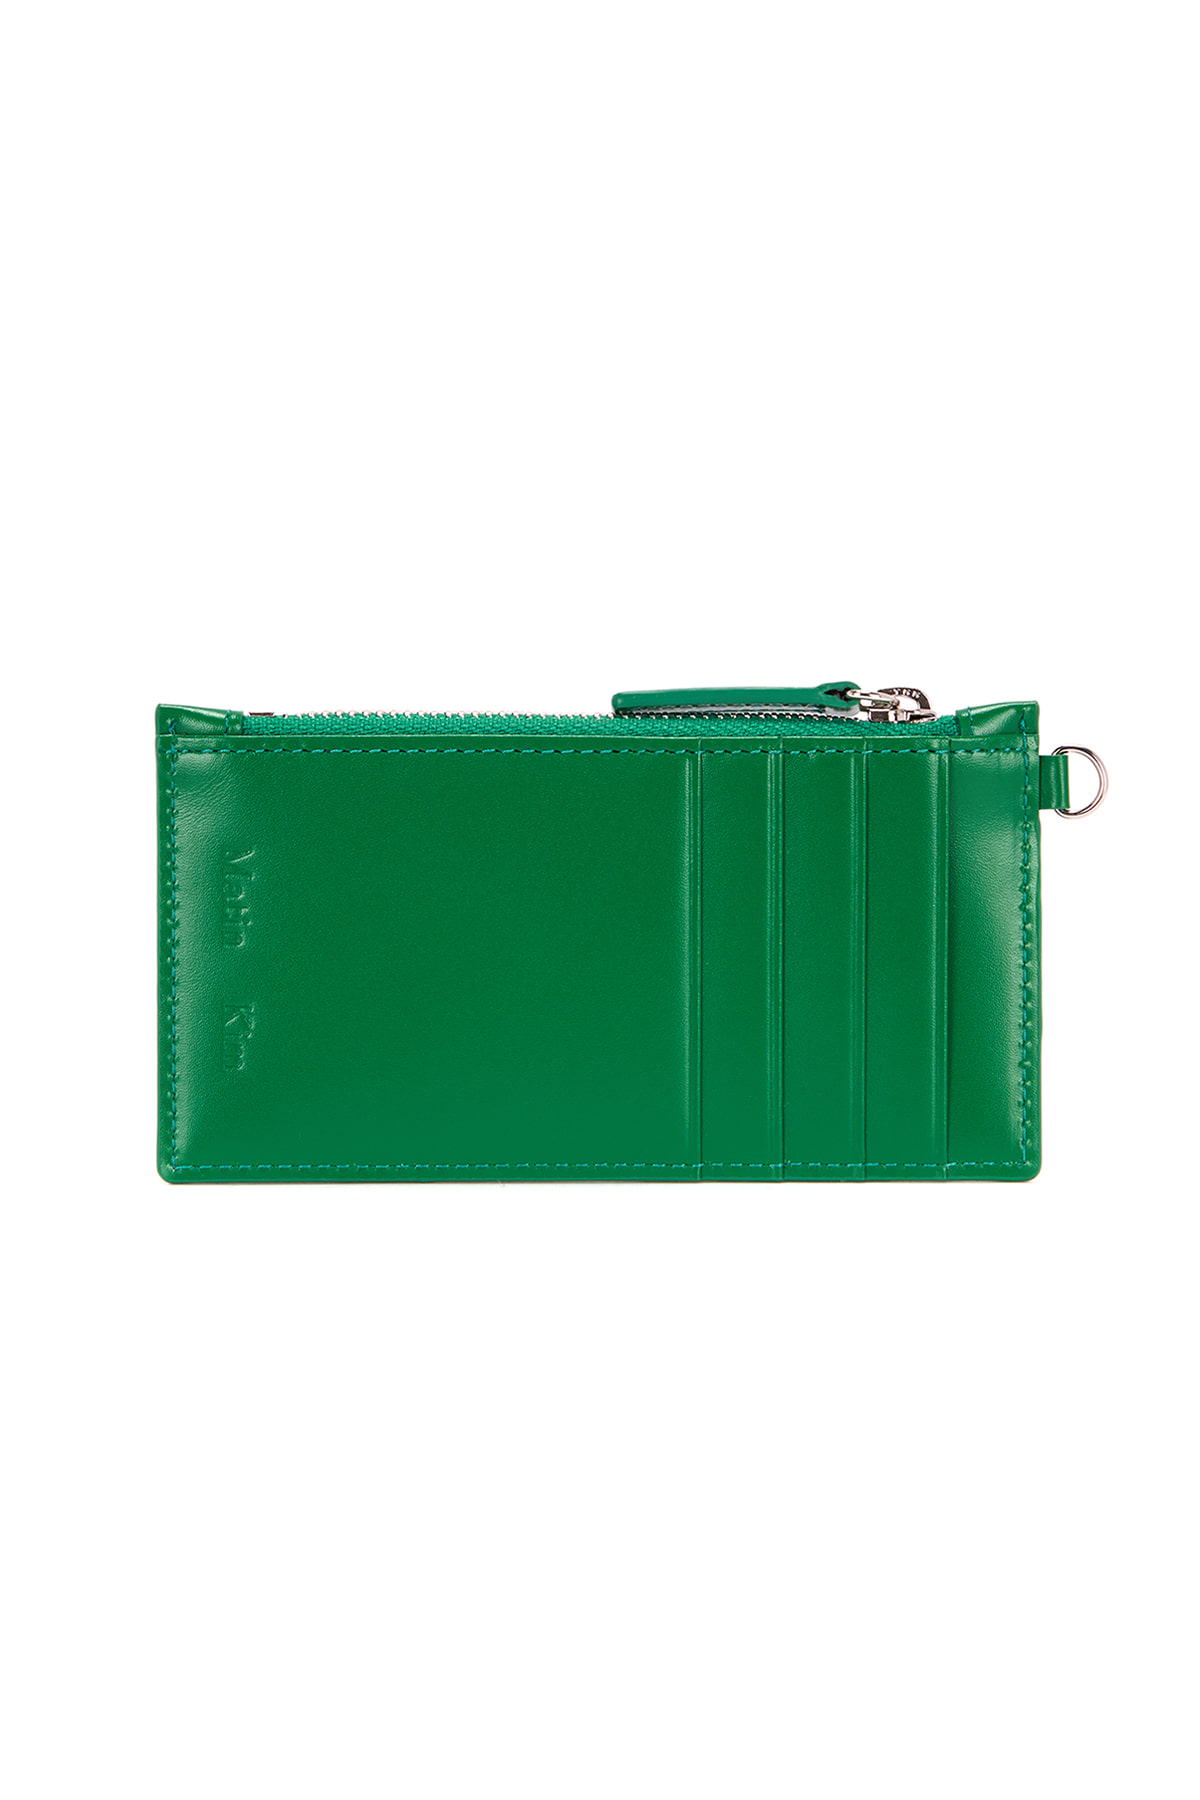 MATIN KIM NECKLACE WALLET IN GREEN